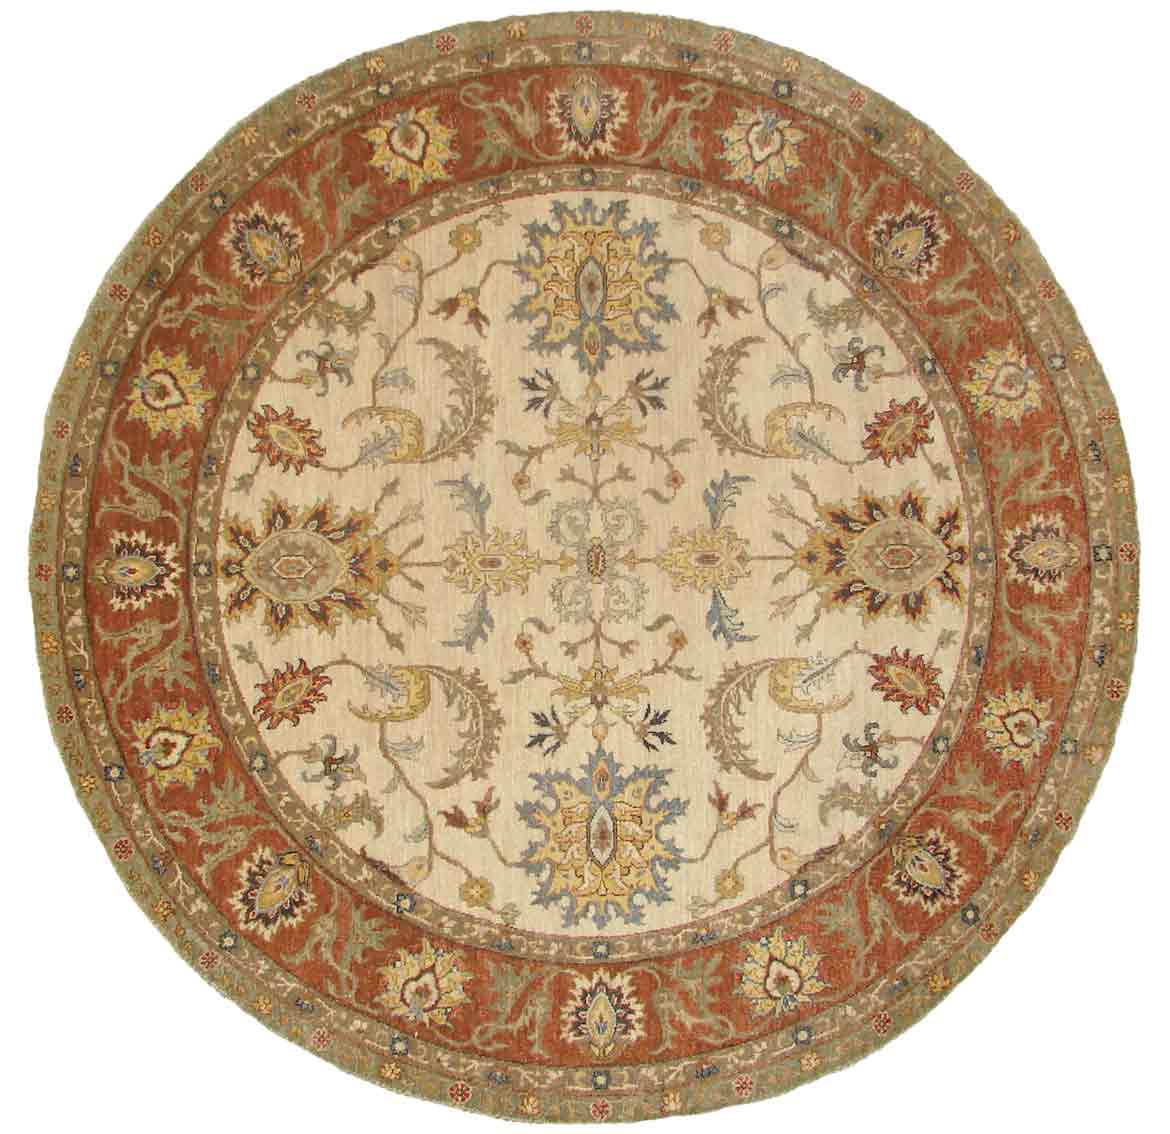 Round, Octagon & Square Rugs SULTAN 18673 Ivory - Beige & Rust - Orange Hand Knotted Rug